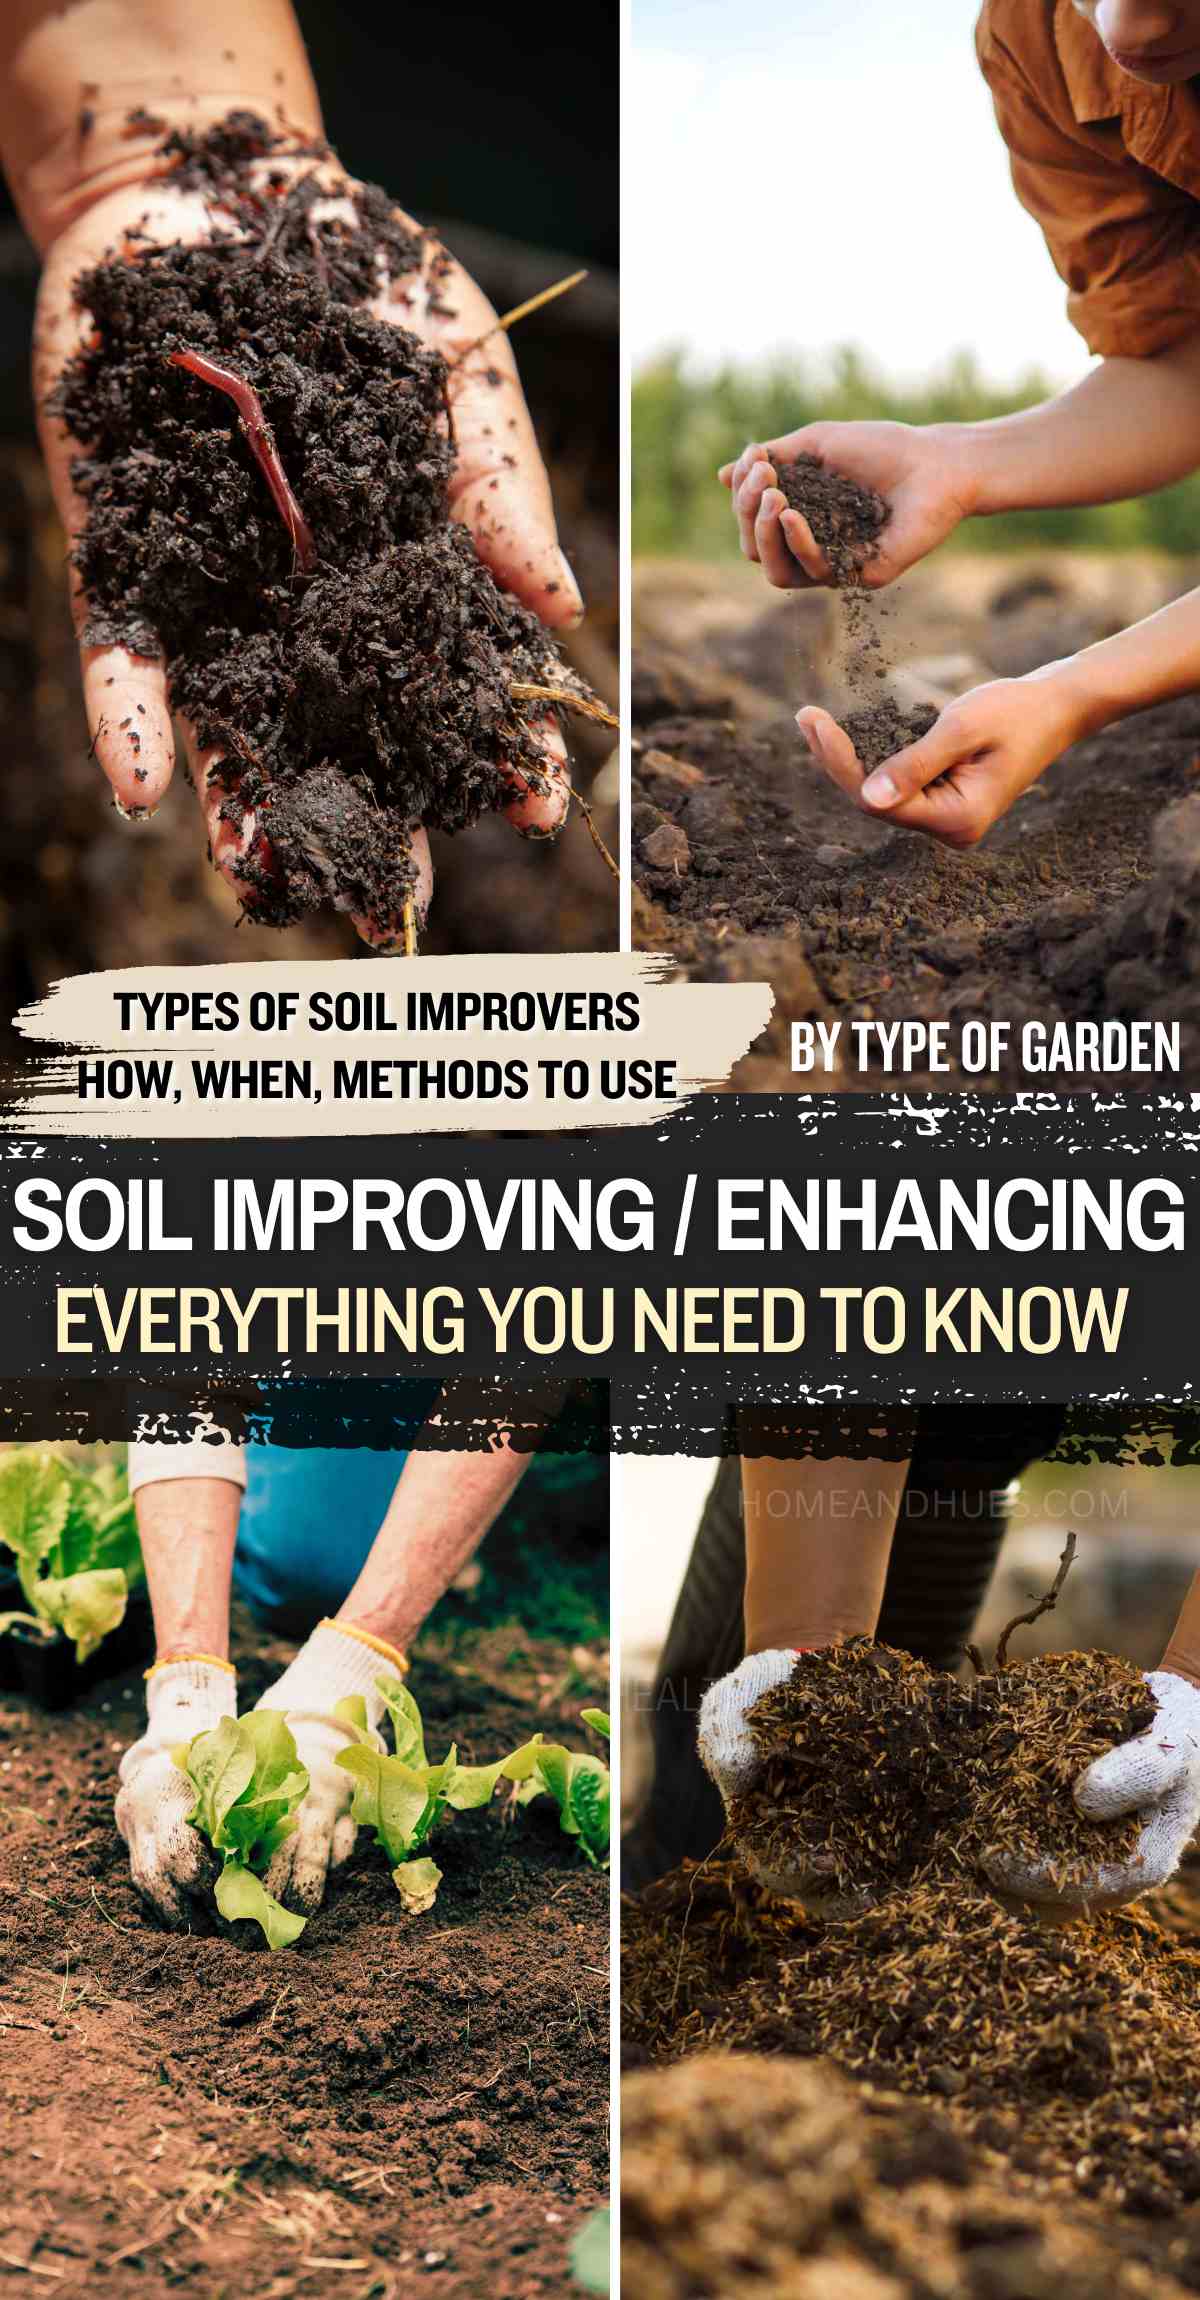 Essential soil improvement tips to enhance your garden, lawn, and raised beds! Learn how to use natural organic soil improvers to enhance and  improve soil quality and structure. Boost your plants' health with these expert tips on improving soil health. Perfect for gardeners looking to create a thriving, beautiful garden. 